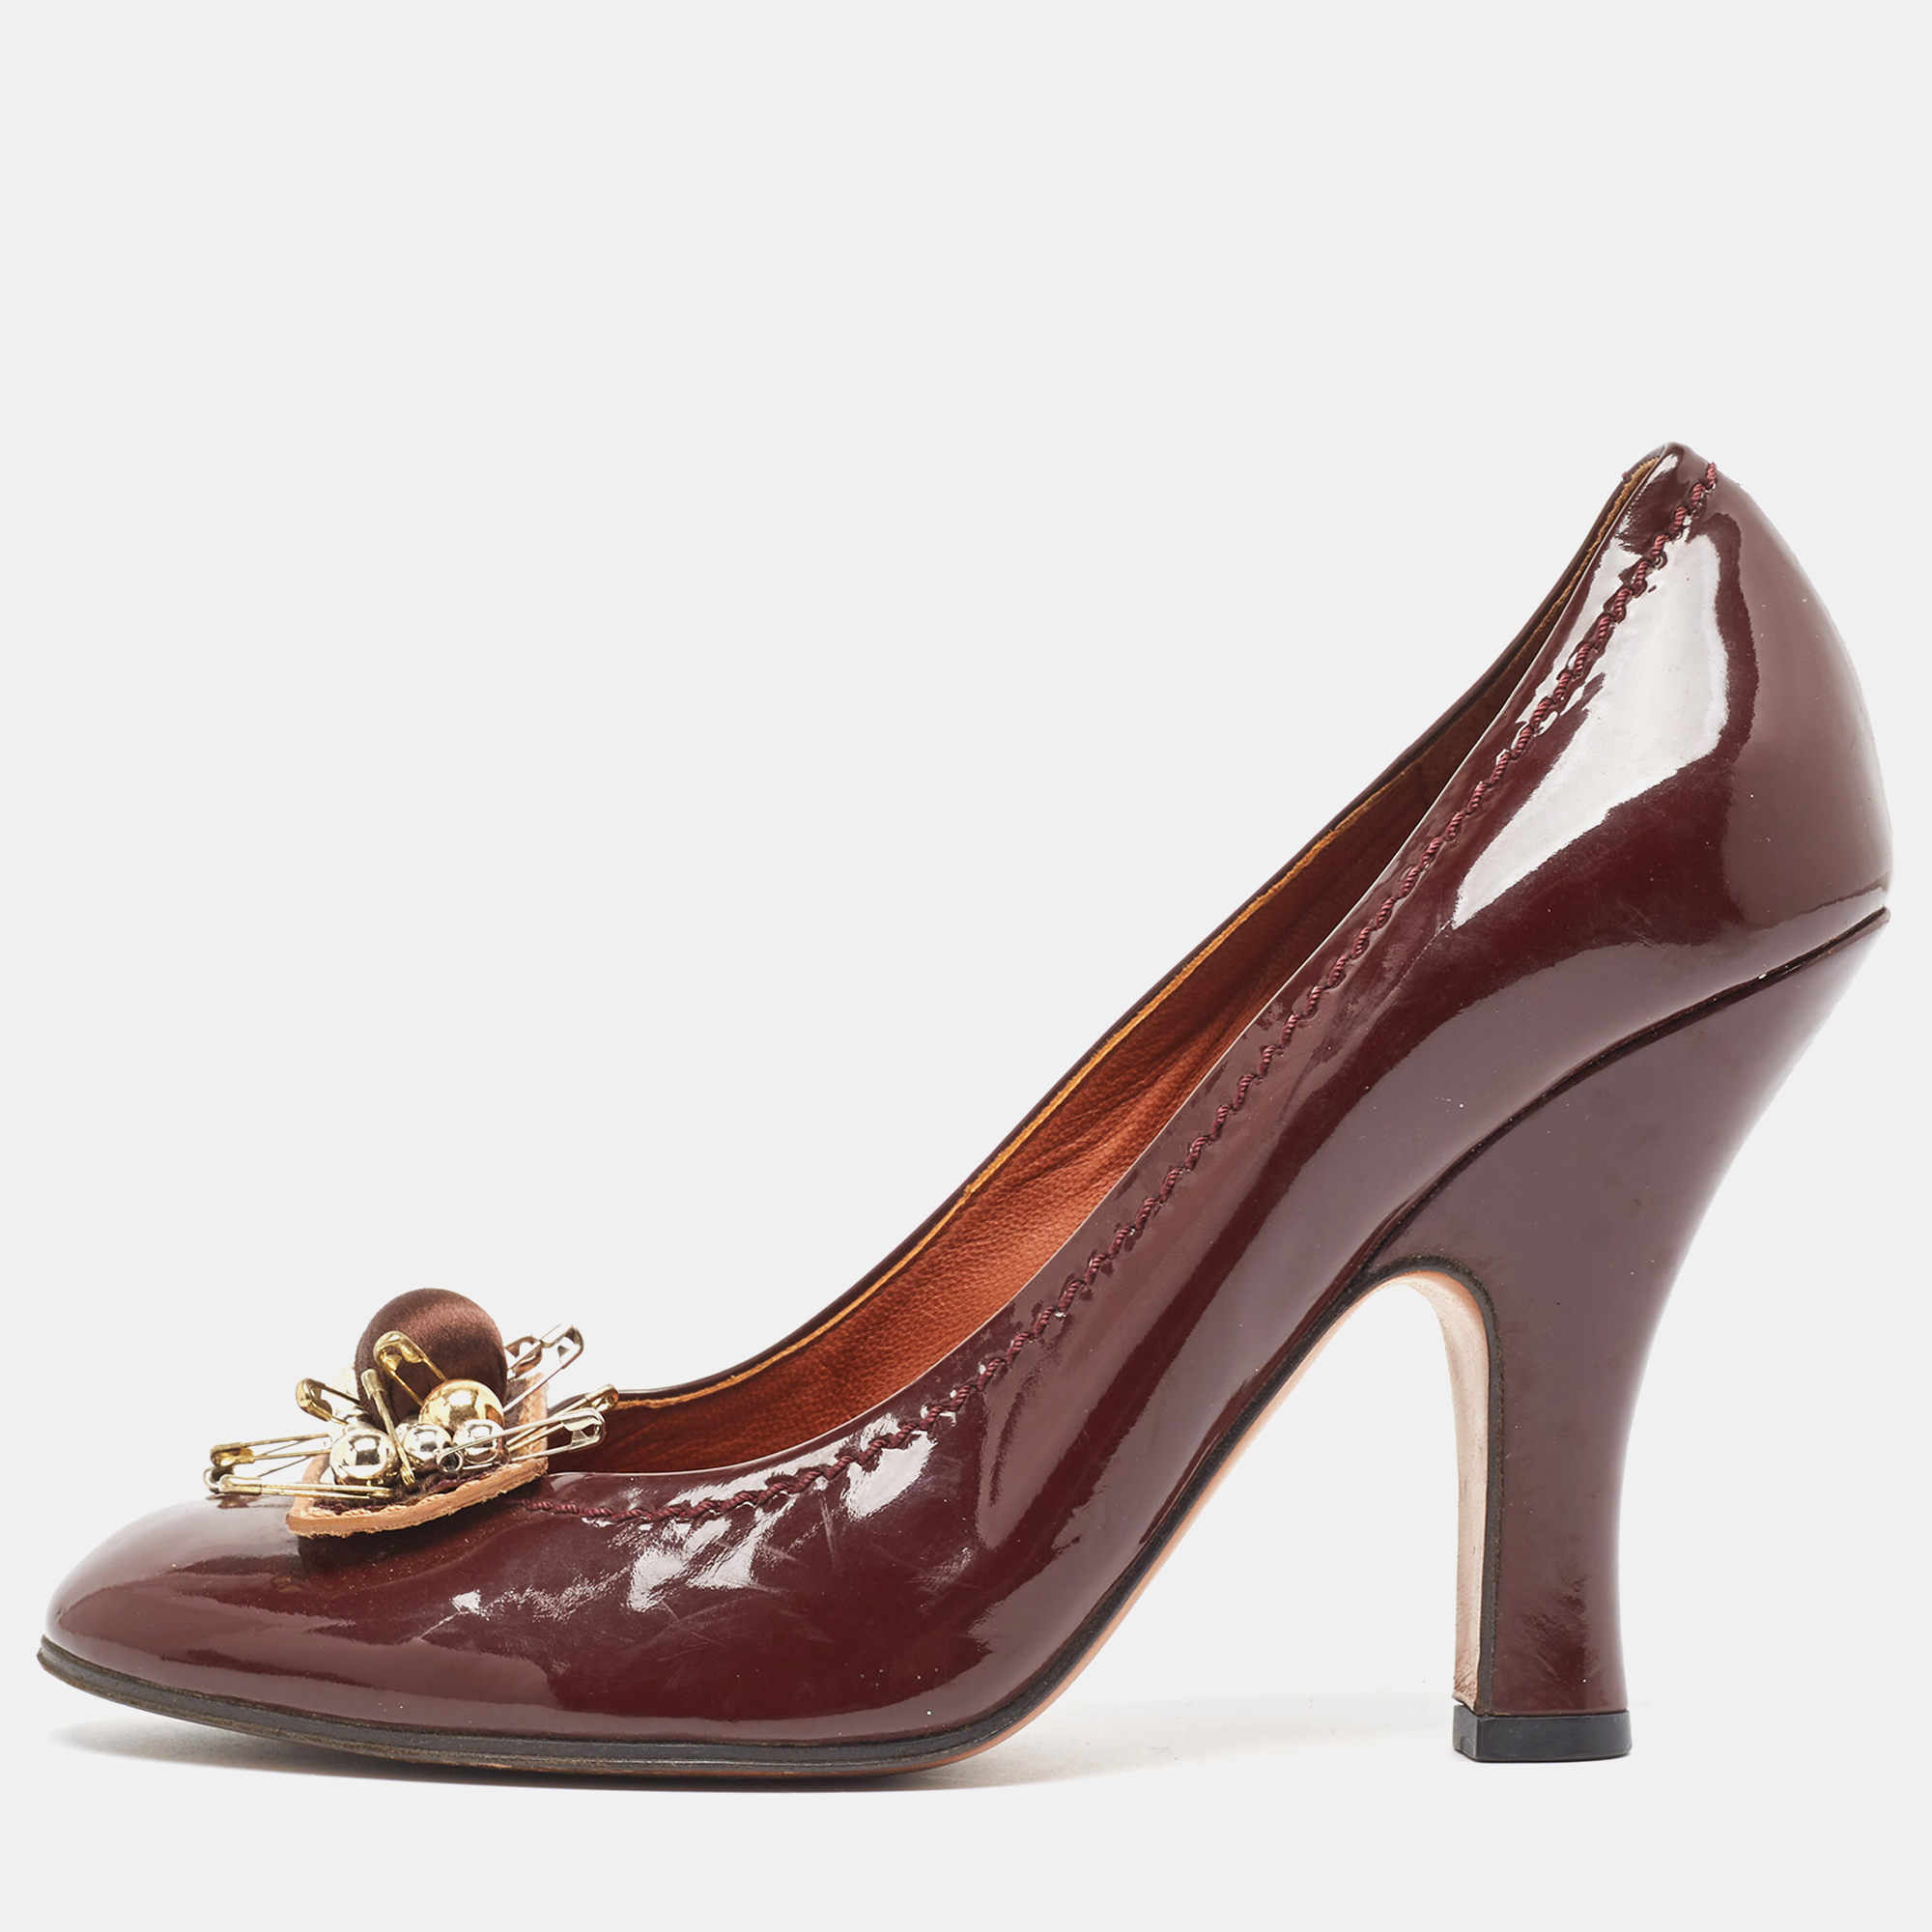 Marc jacobs burgundy patent leather embellished pumps size 37.5